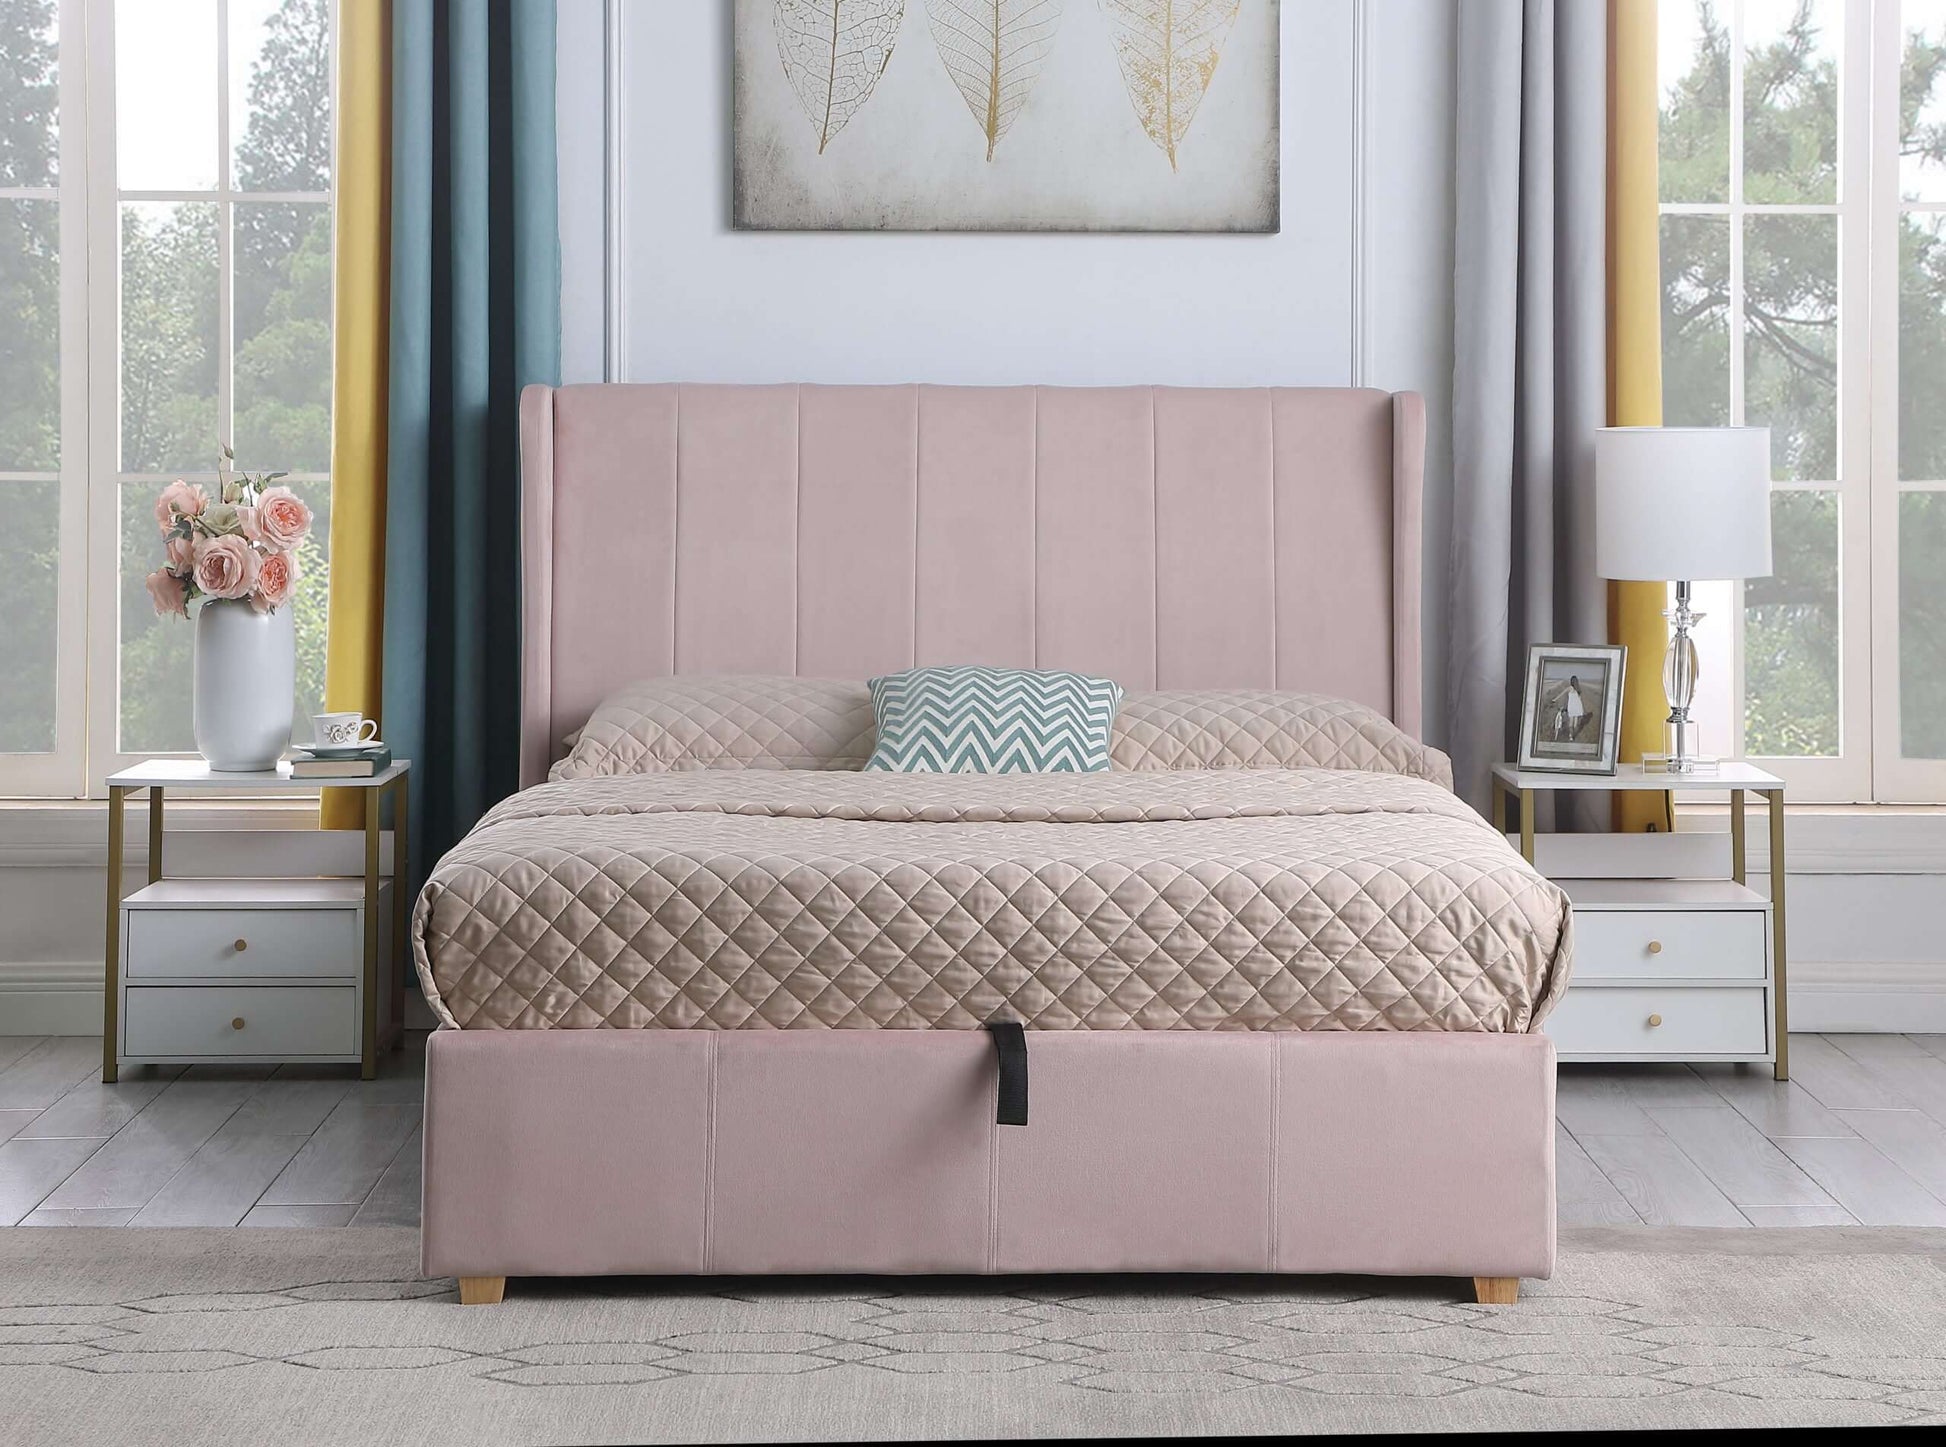 Amelia Plus 5' Storage Bed - Pink Velvet Fabric - The Right Buy Store